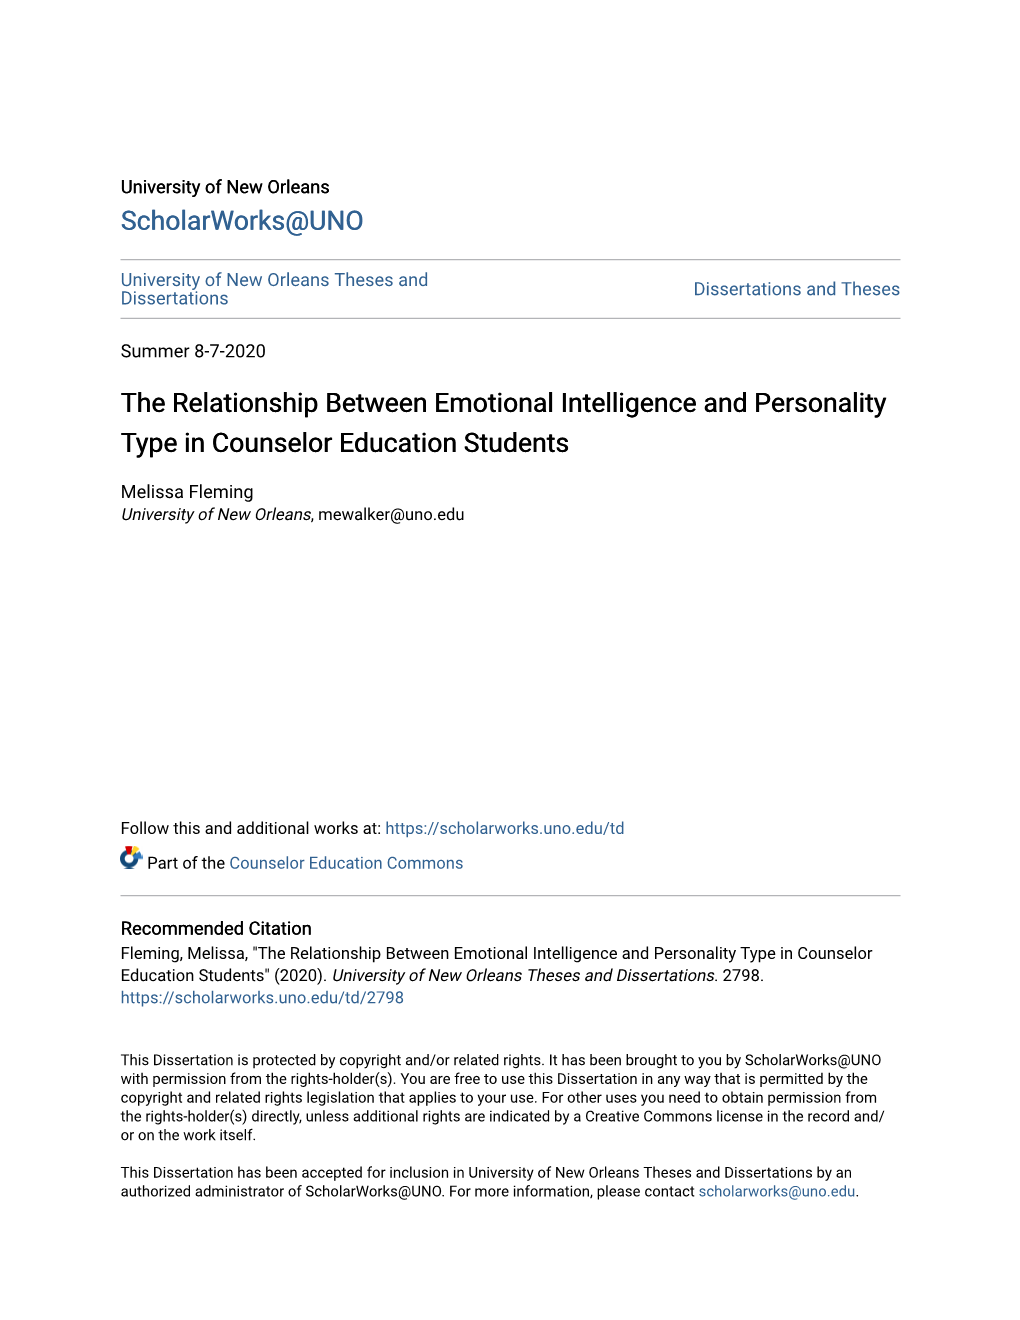 The Relationship Between Emotional Intelligence and Personality Type in Counselor Education Students